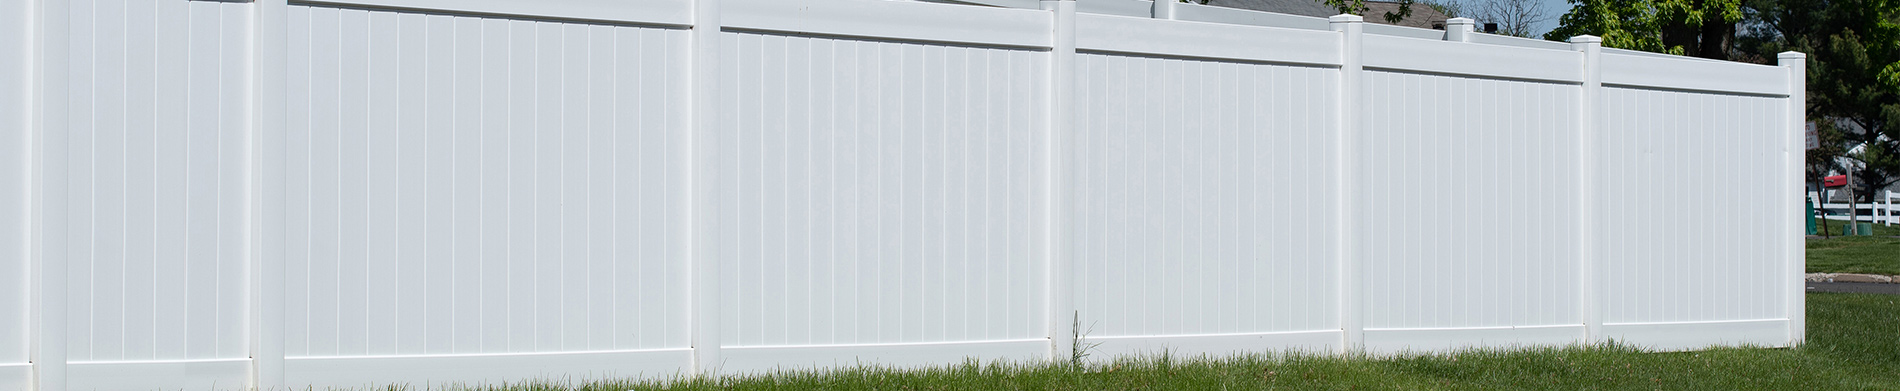 How to Augment Your Landscape with Duramax Vinyl Privacy Fence Panels?